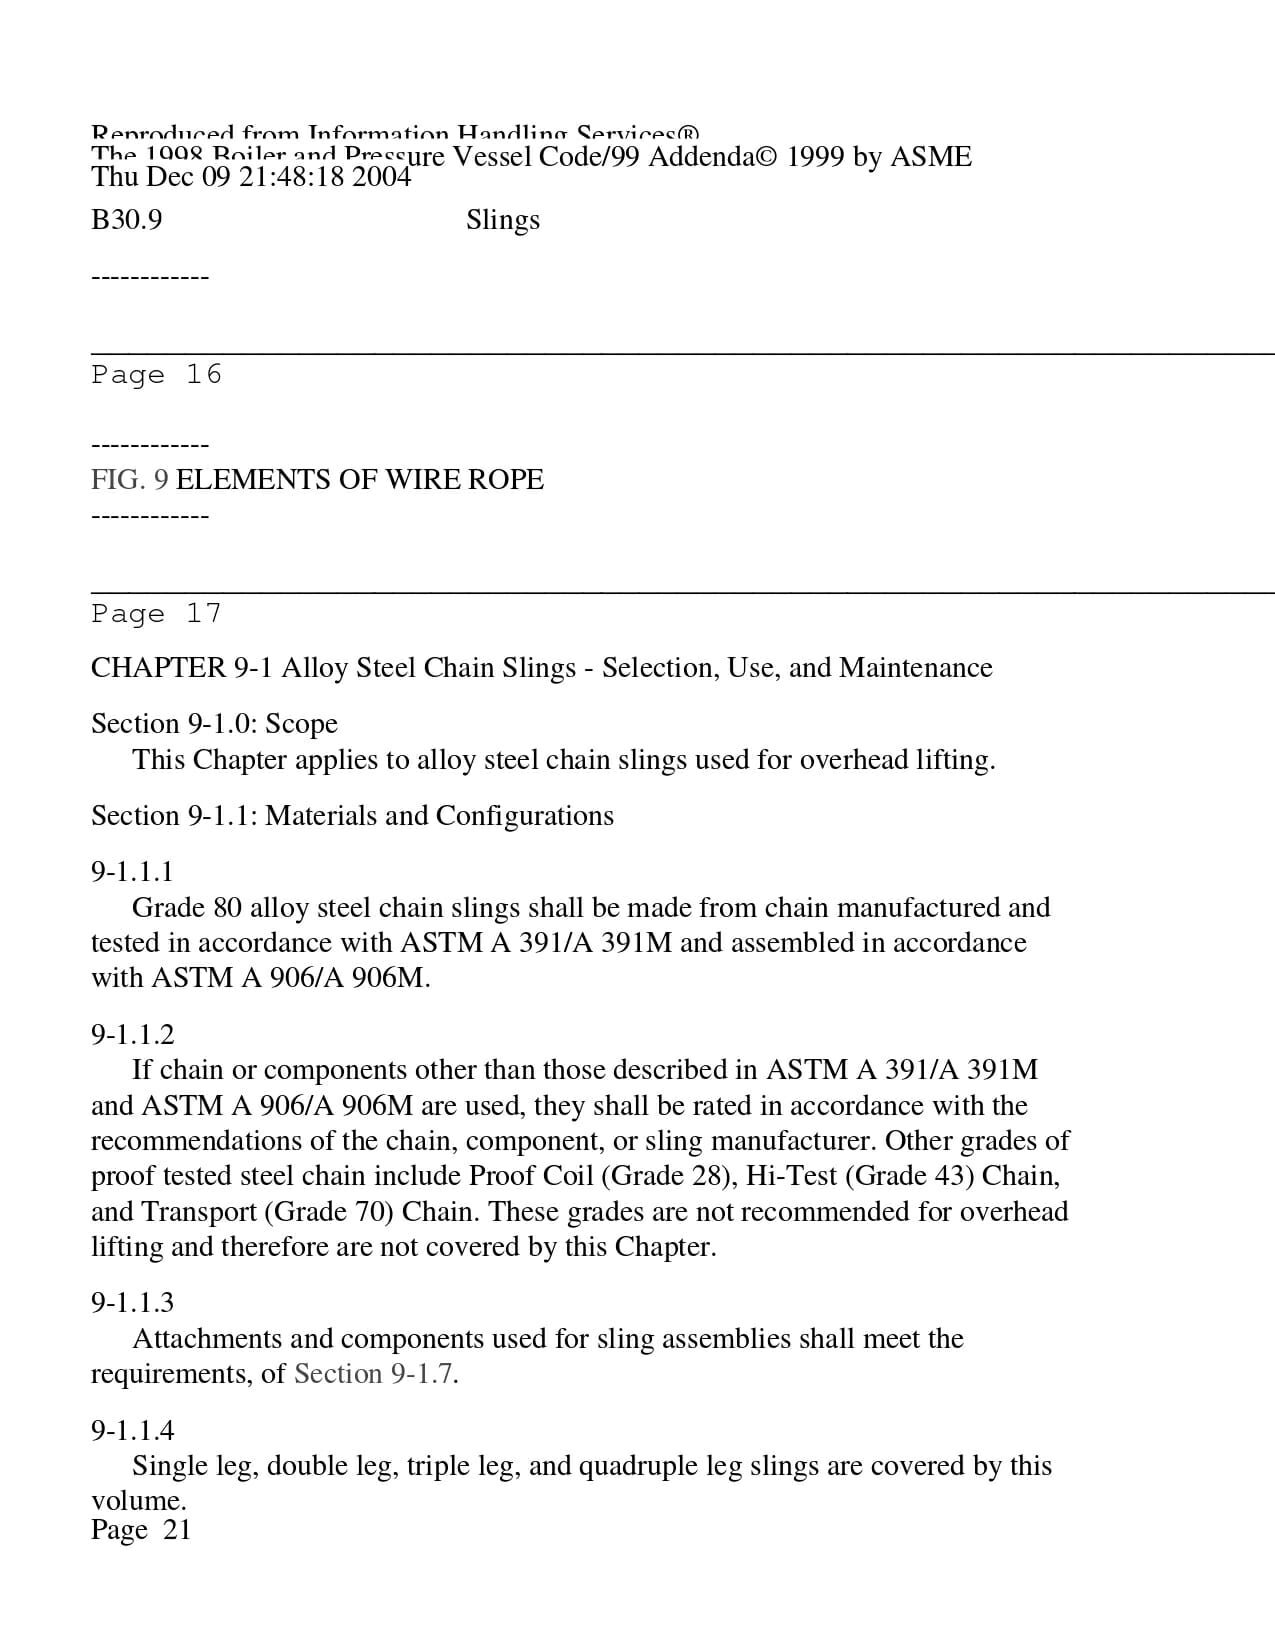 vdocument.in_asme-b309_page-0021